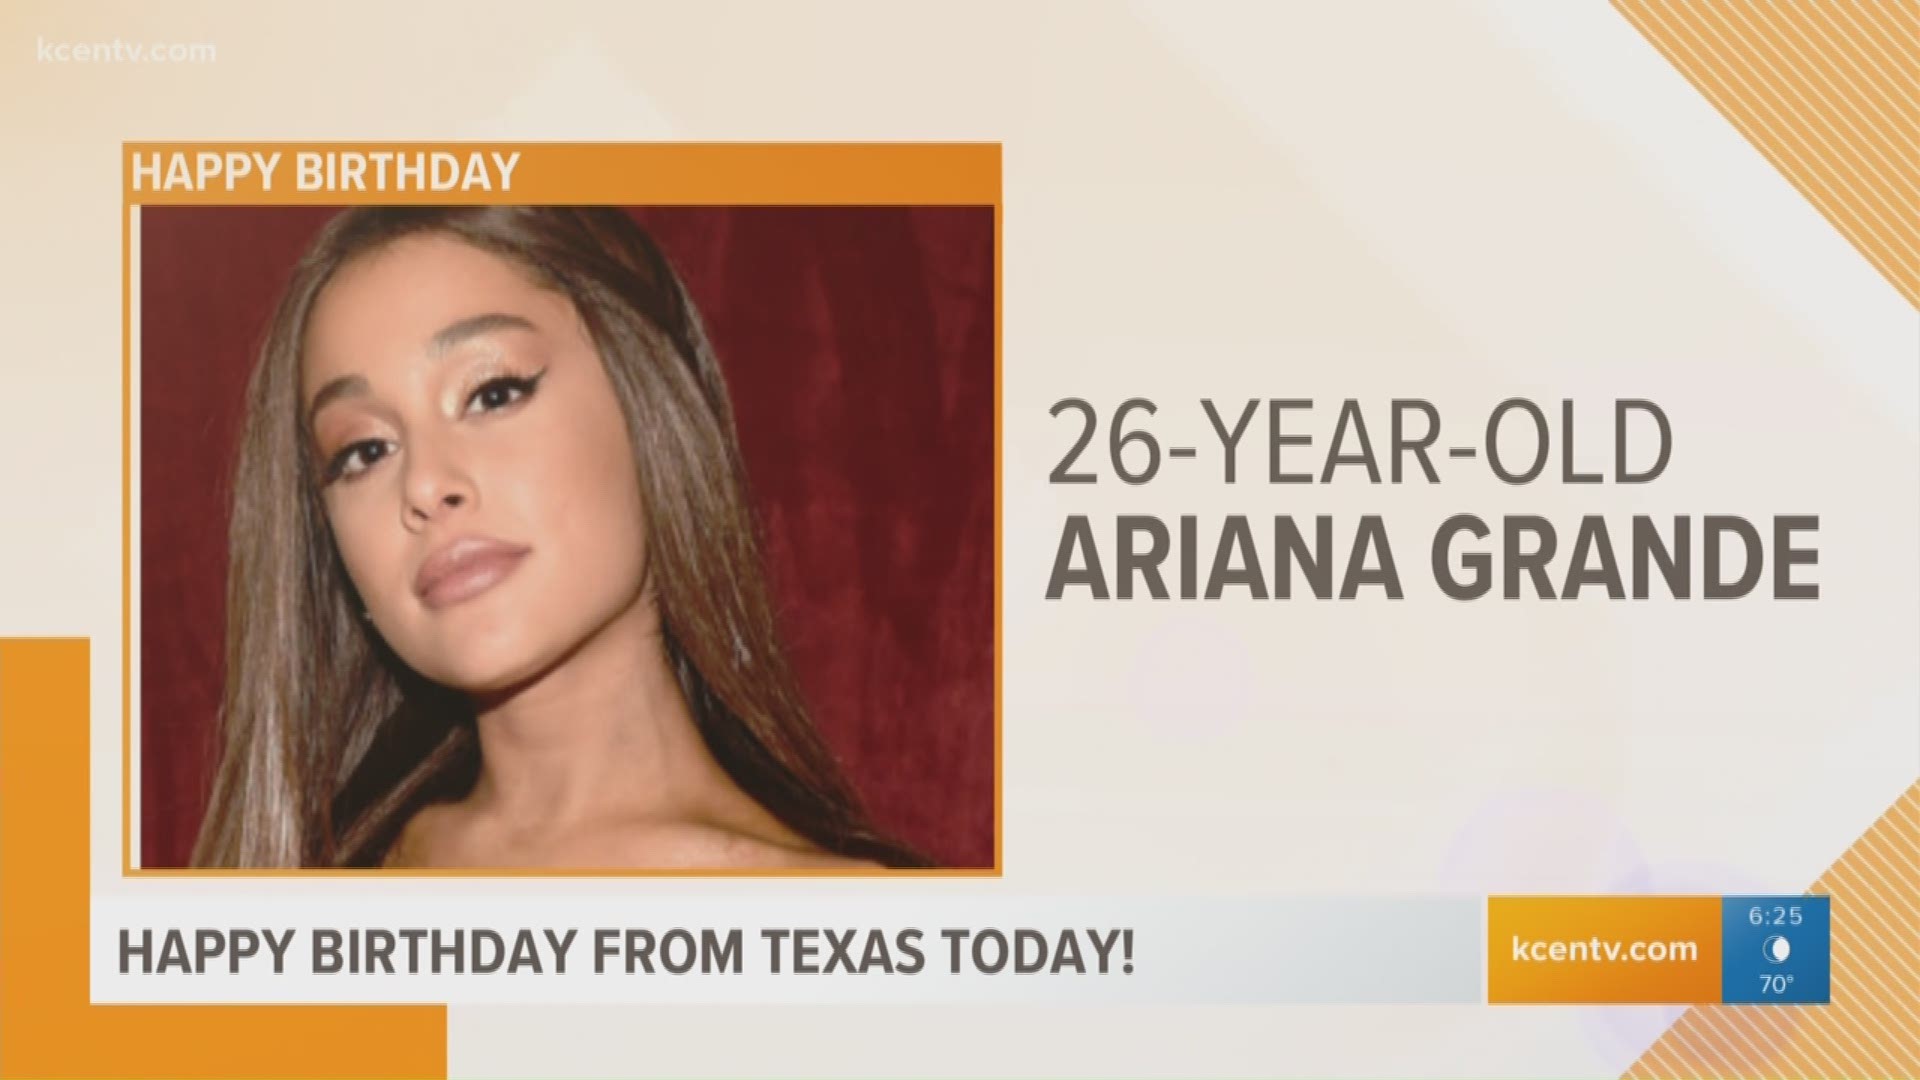 Happy birthday to Ariana Grande and all the Central Texans born on June 26!